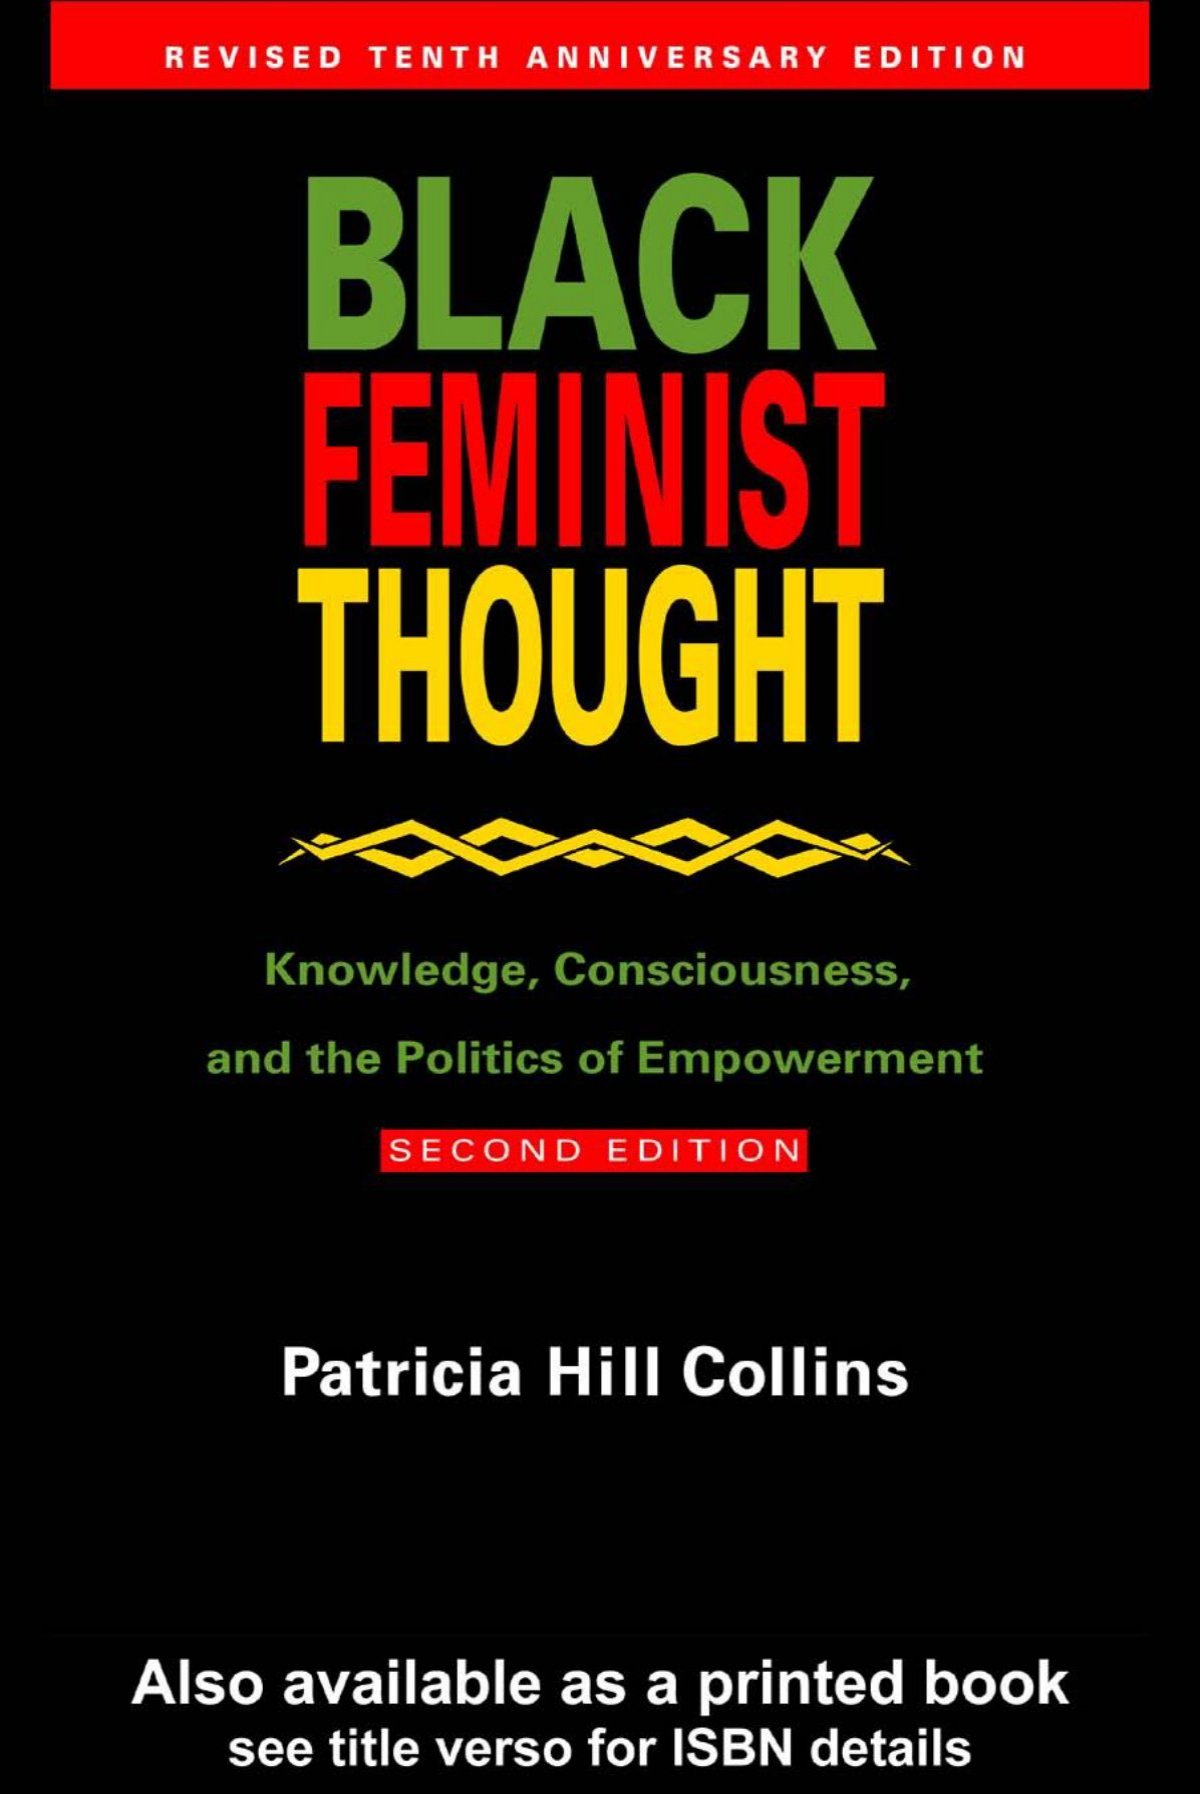 black-feminist-though-by-patricia-hill-collins